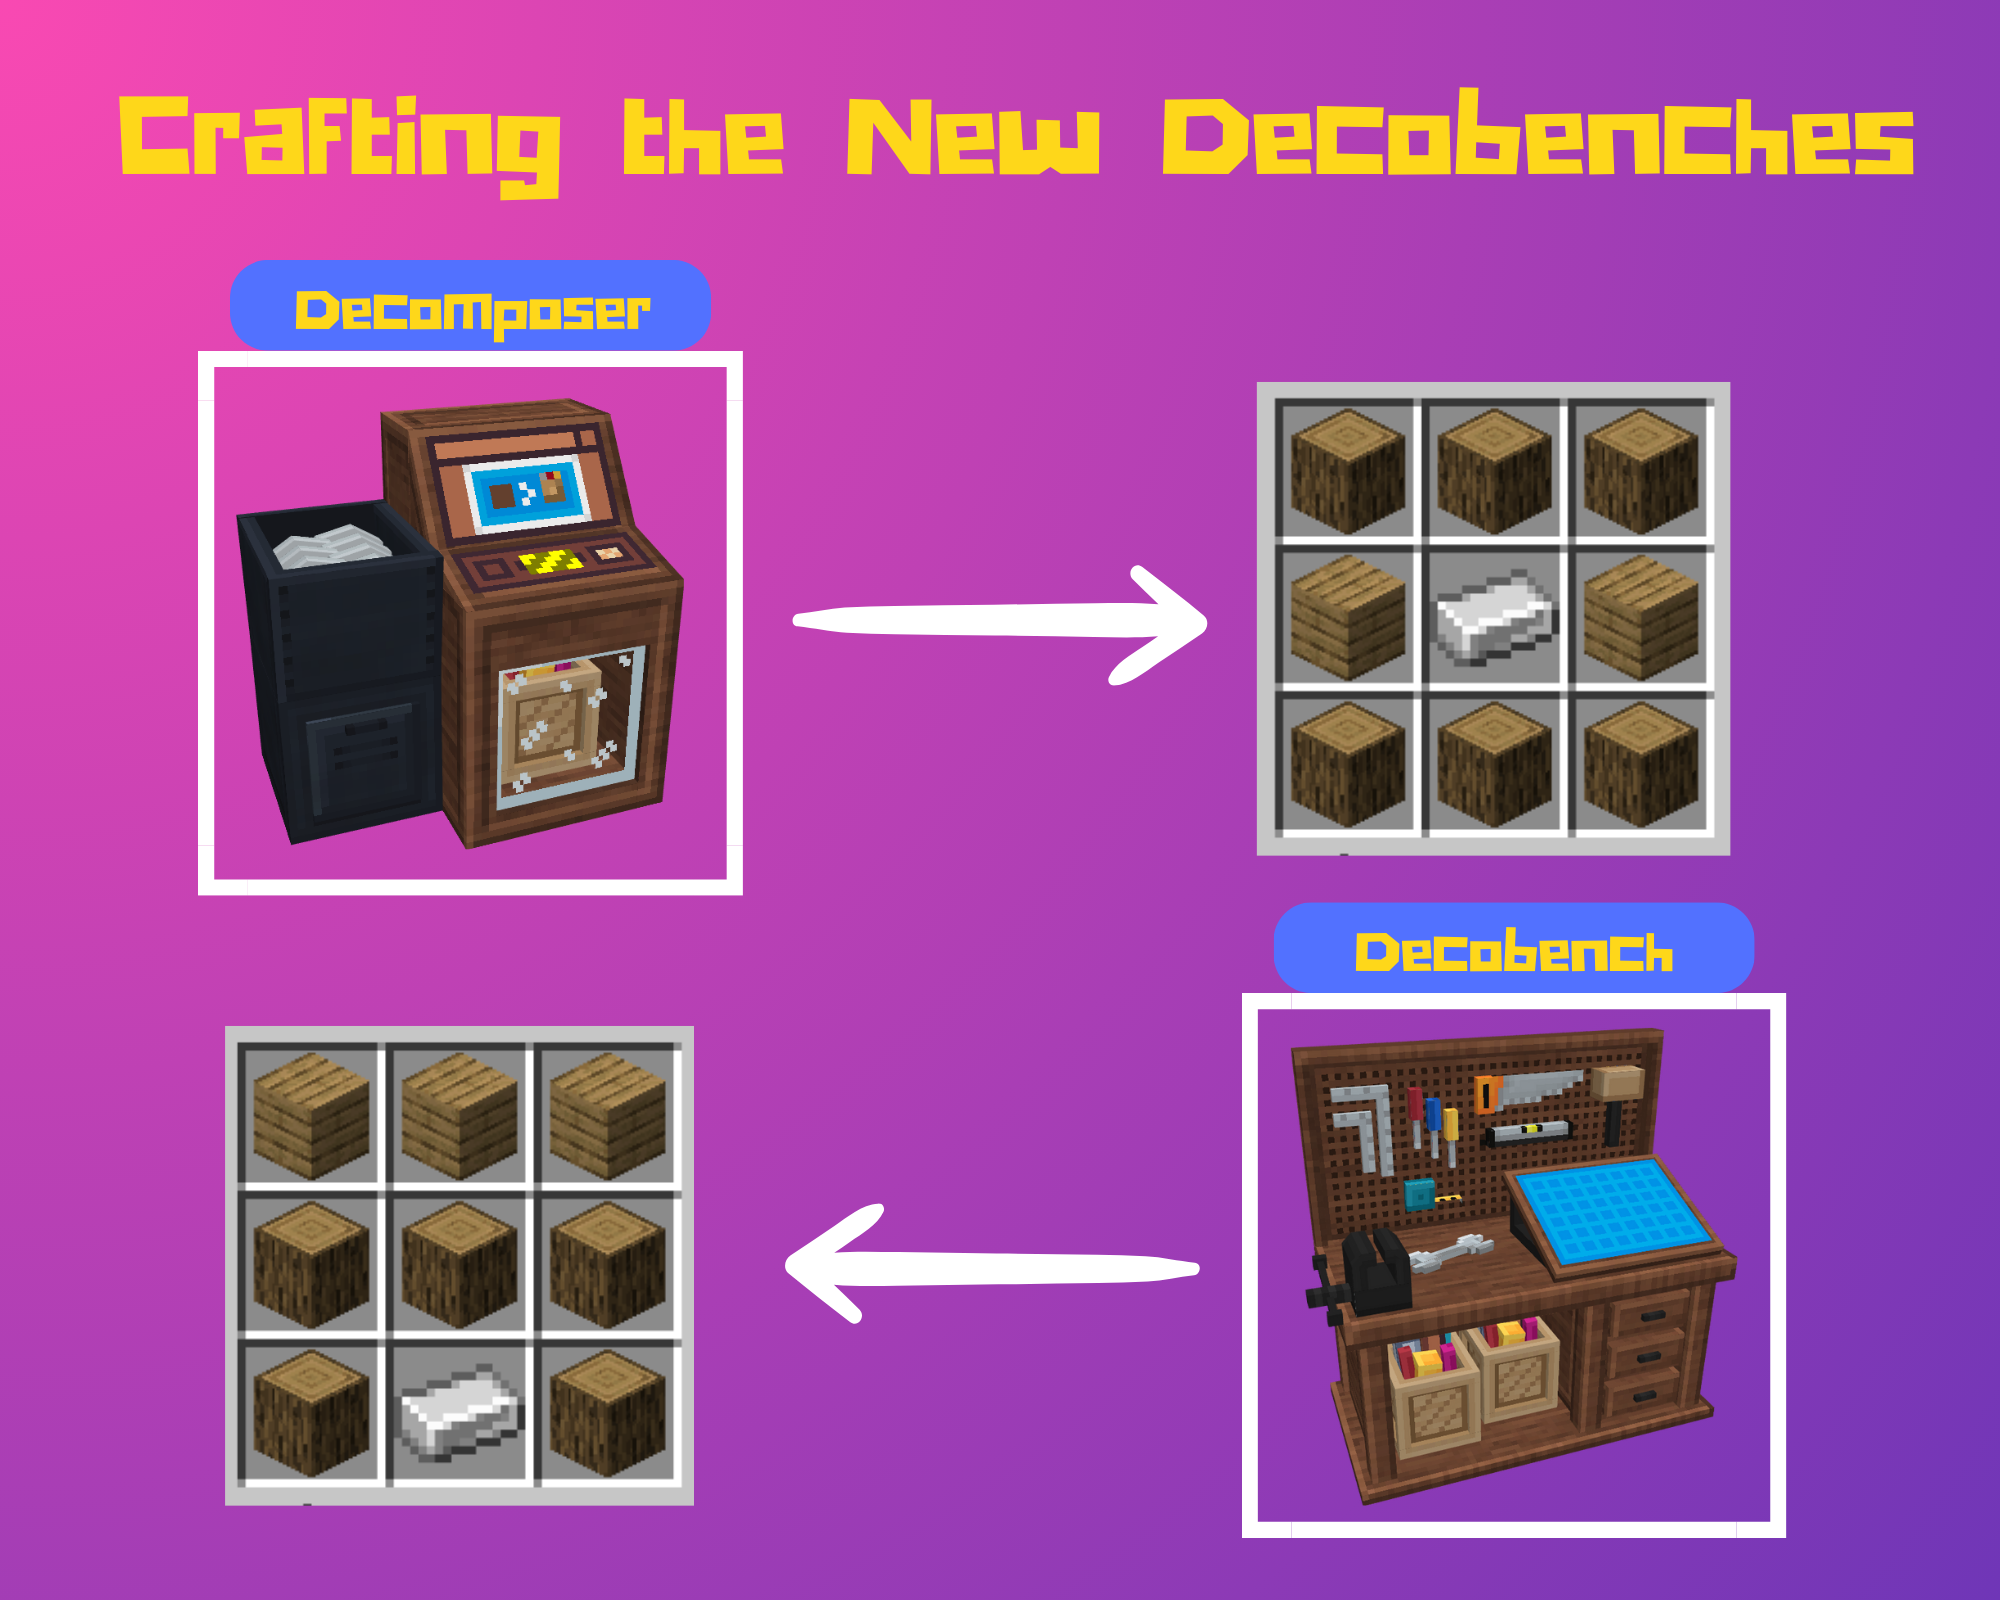 Crafting recipes for the Decobenches